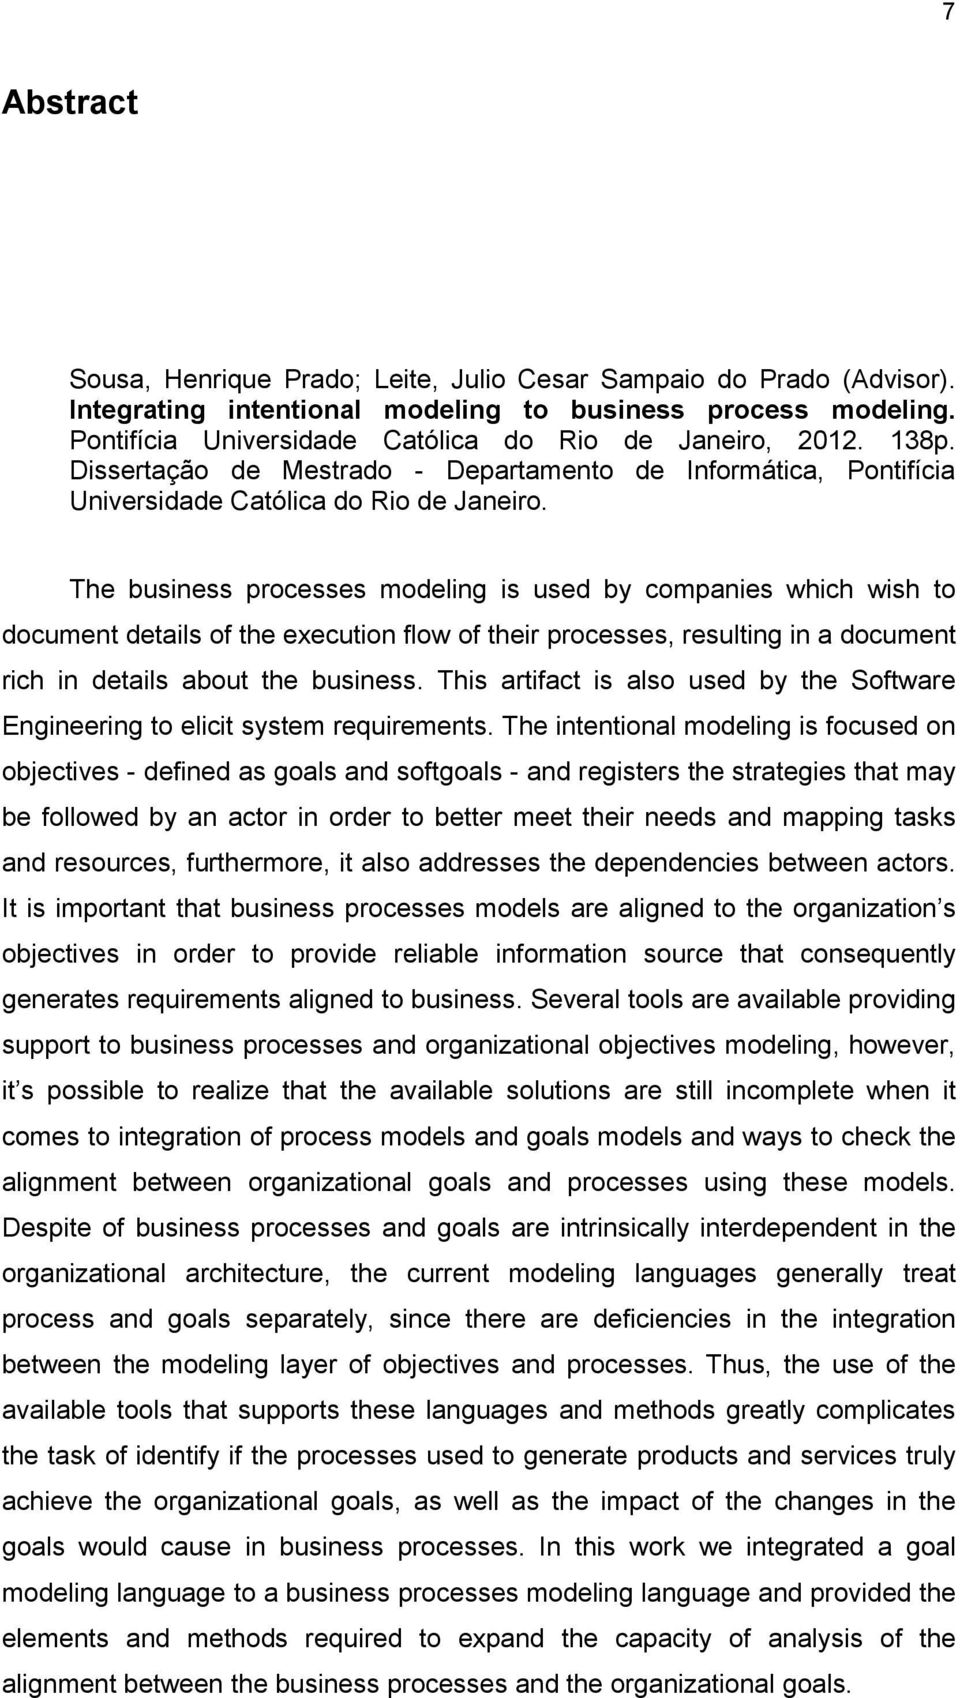 The business processes modeling is used by companies which wish to document details of the execution flow of their processes, resulting in a document rich in details about the business.